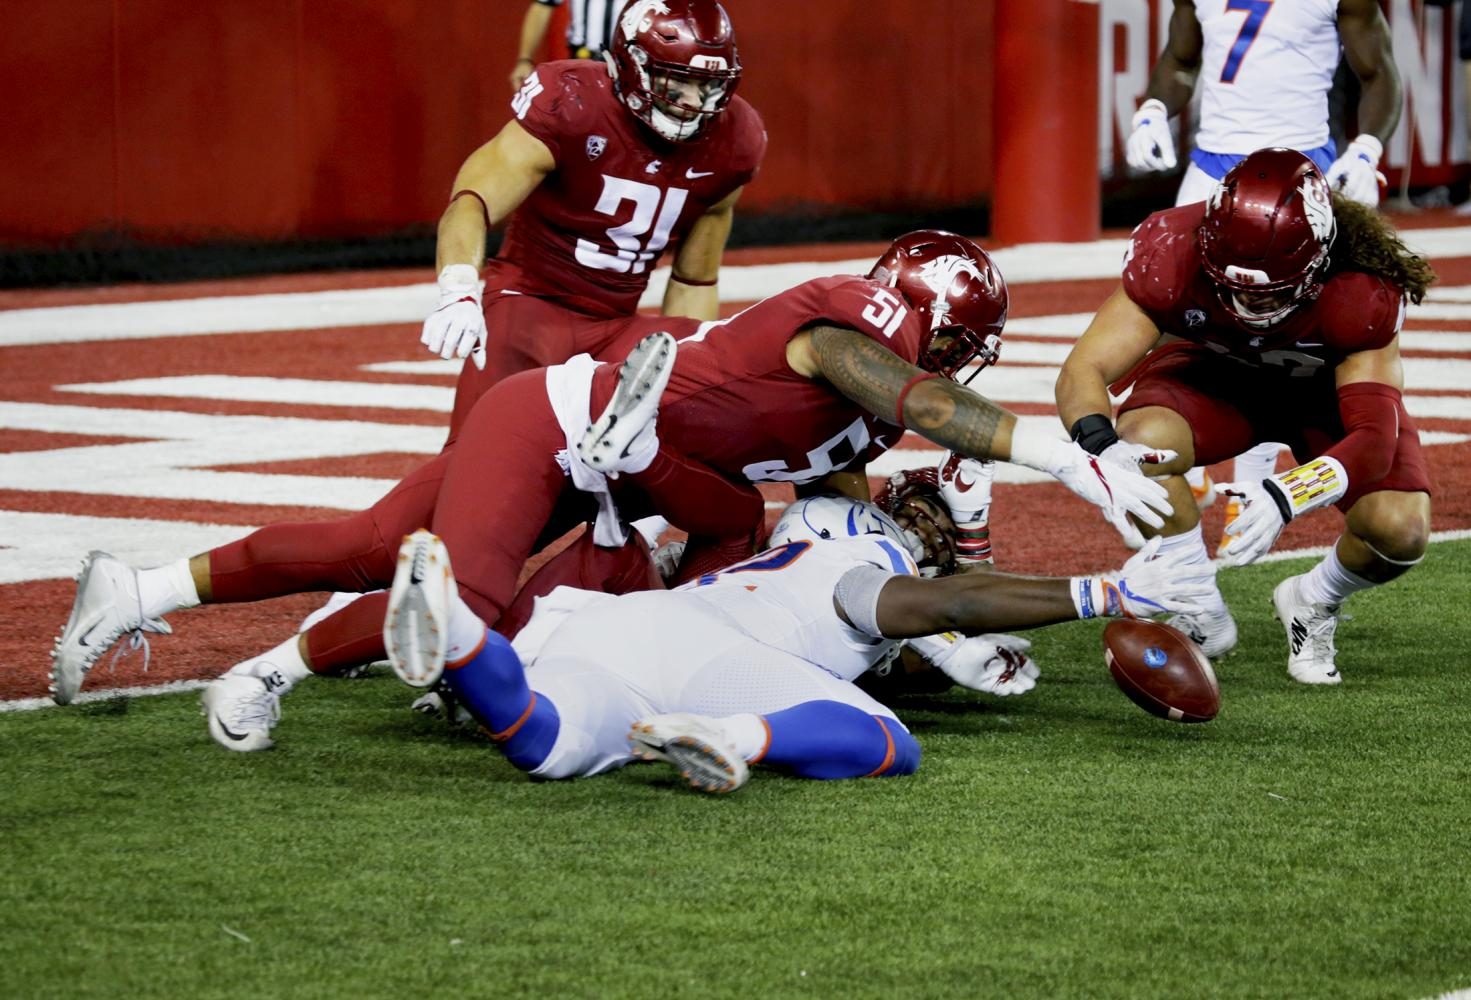 Senior linebacker Frankie Luvu recovers a fumble inside the Washington State Redzone against Boise State on Saturday. 